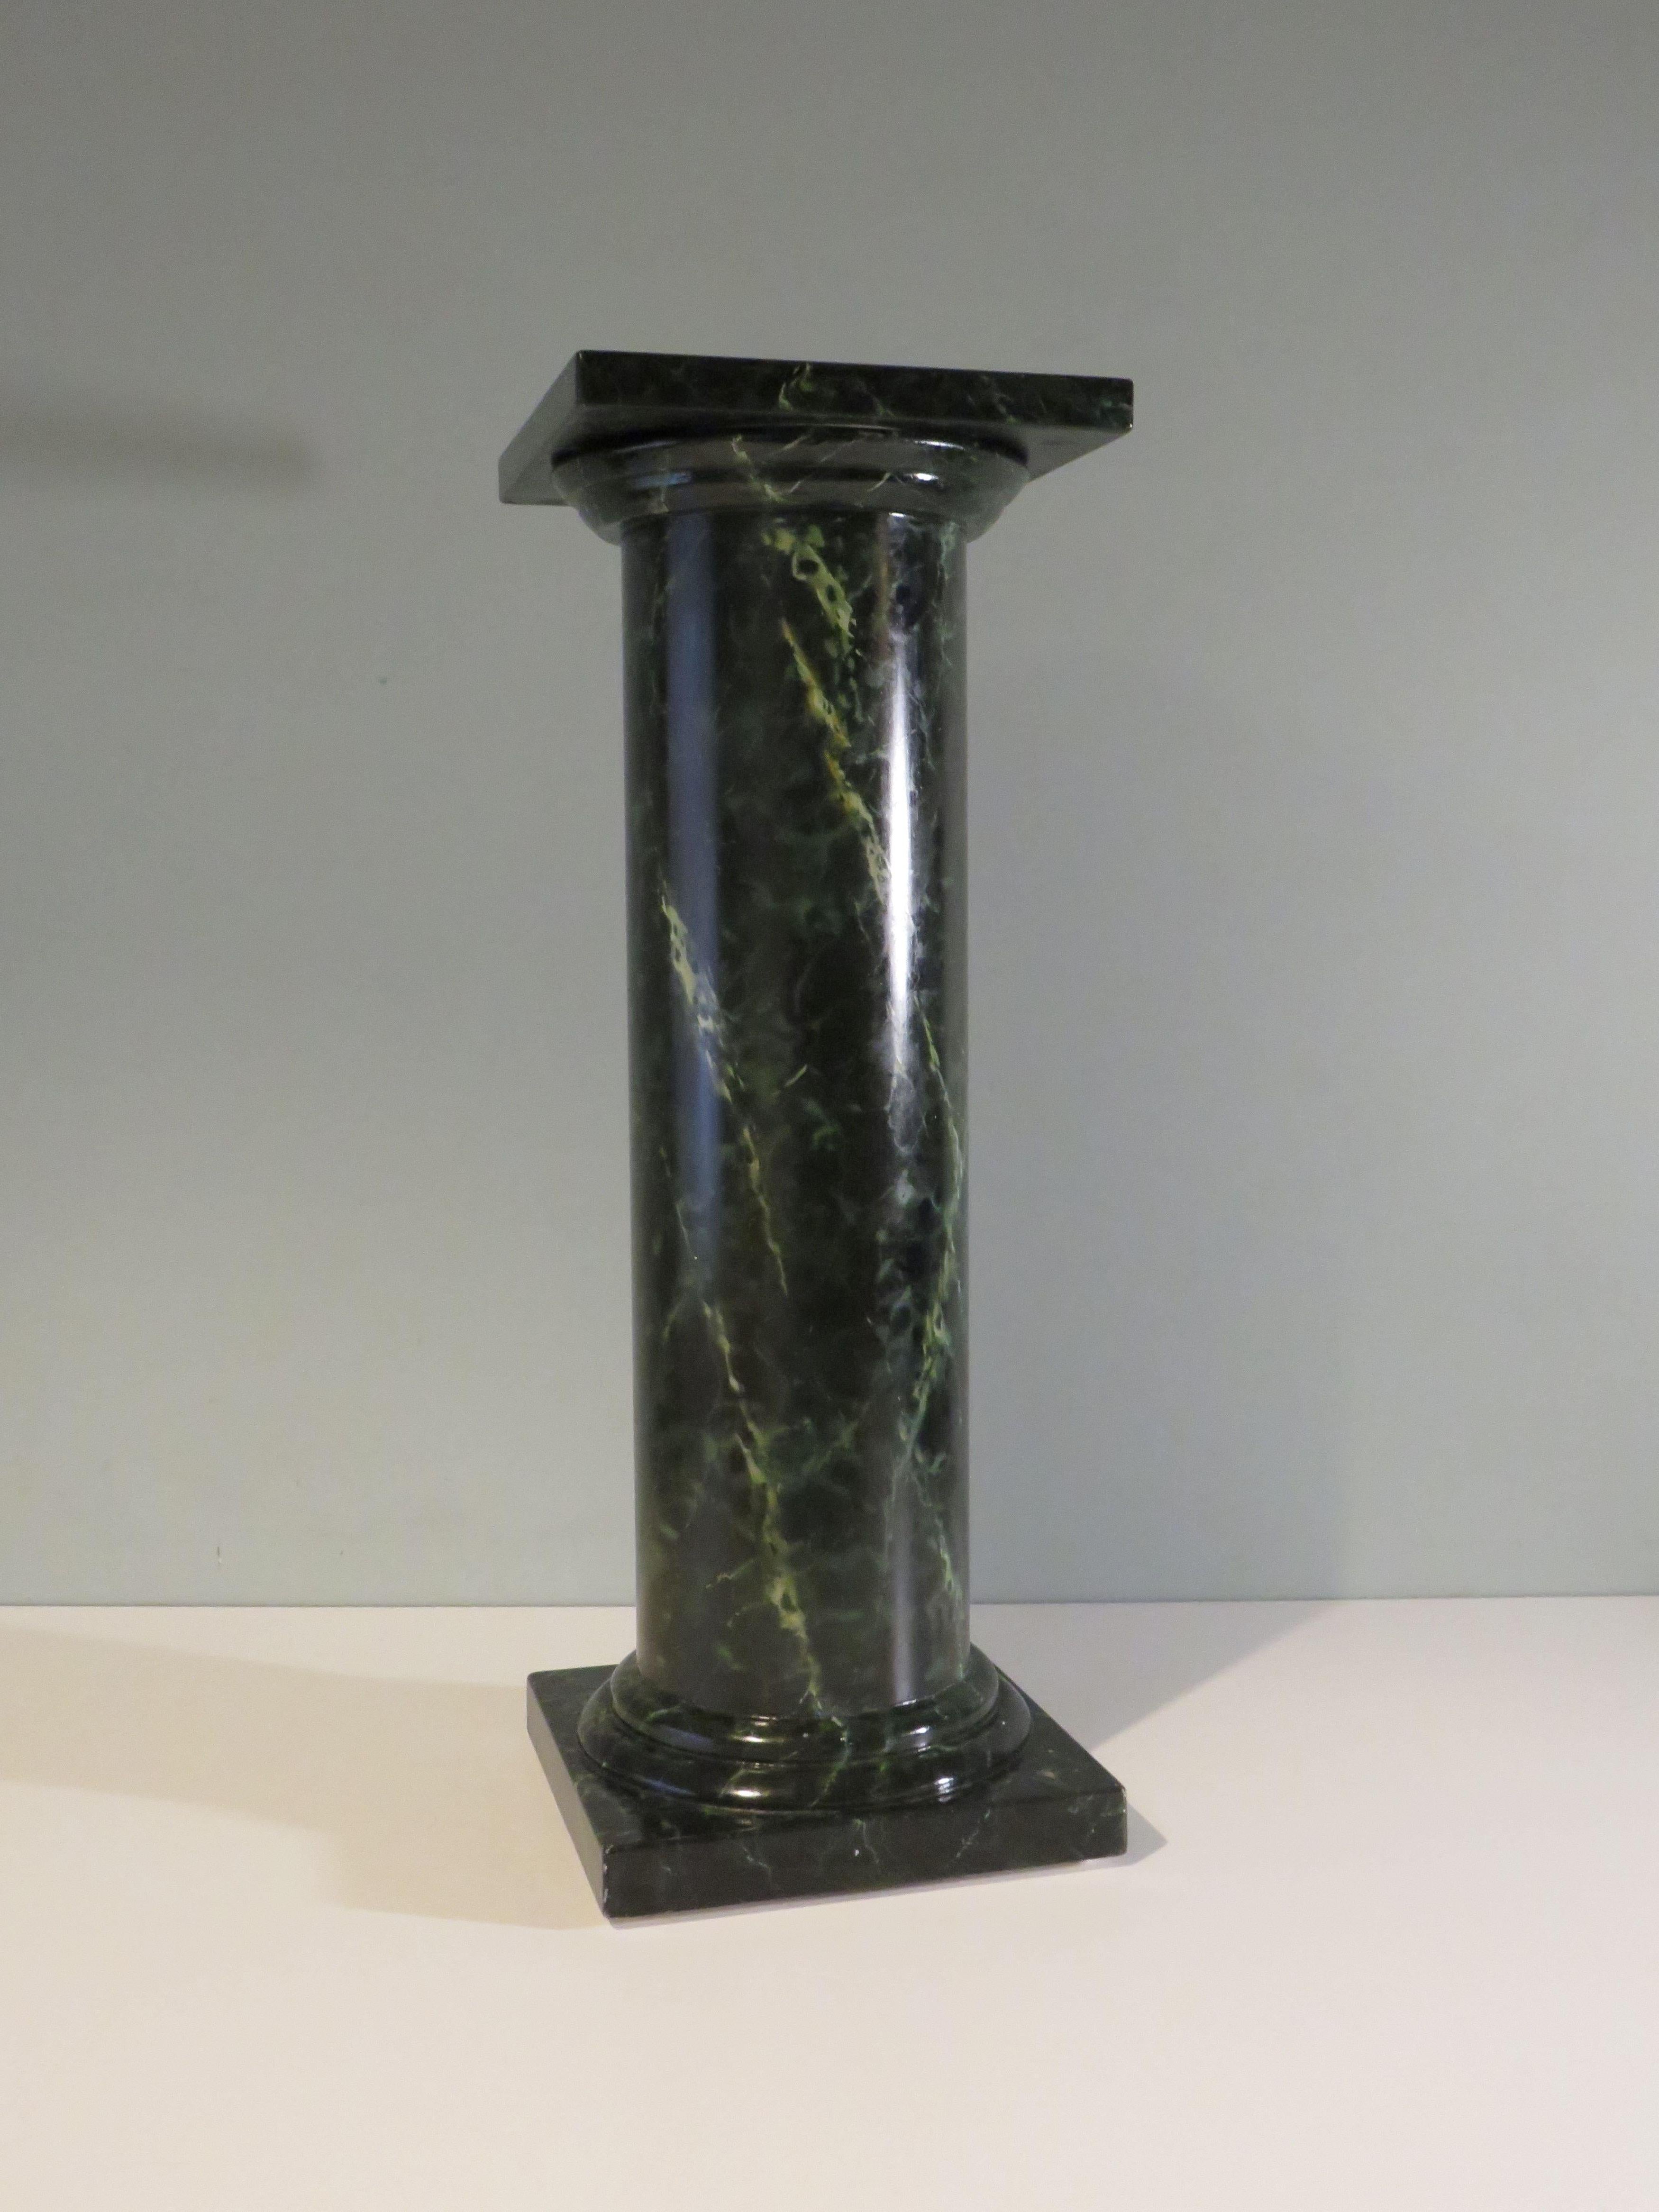 Classic style, round column in wood with black, green faux marble painting.
If there is no shipping price listed to your place of residence, please do not hesitate to ask me for a good shipping price, I will be happy to provide it to you.